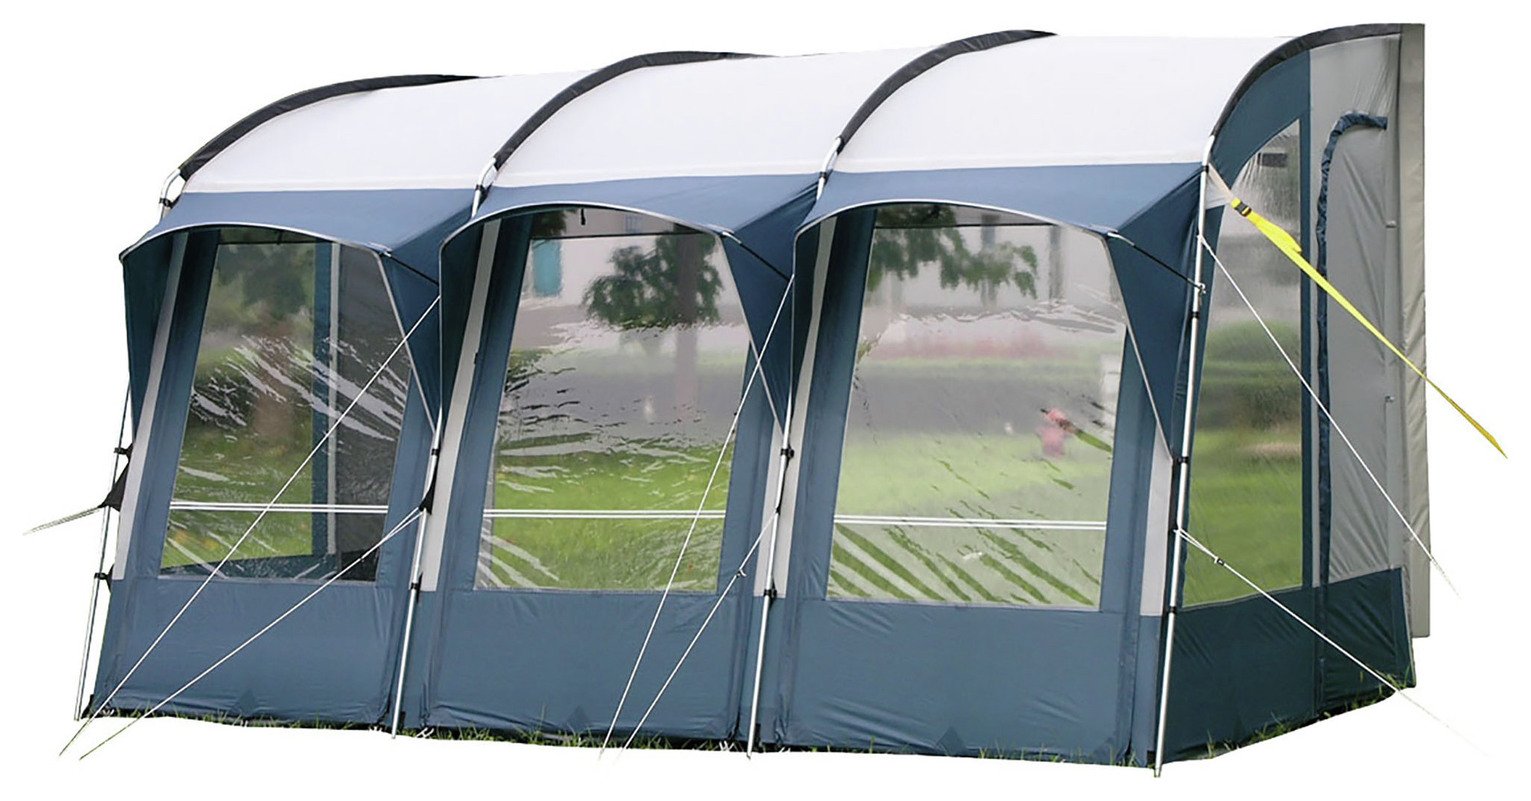 Royal Wessex Caravan Pole Awning 390 - Blue & Silver